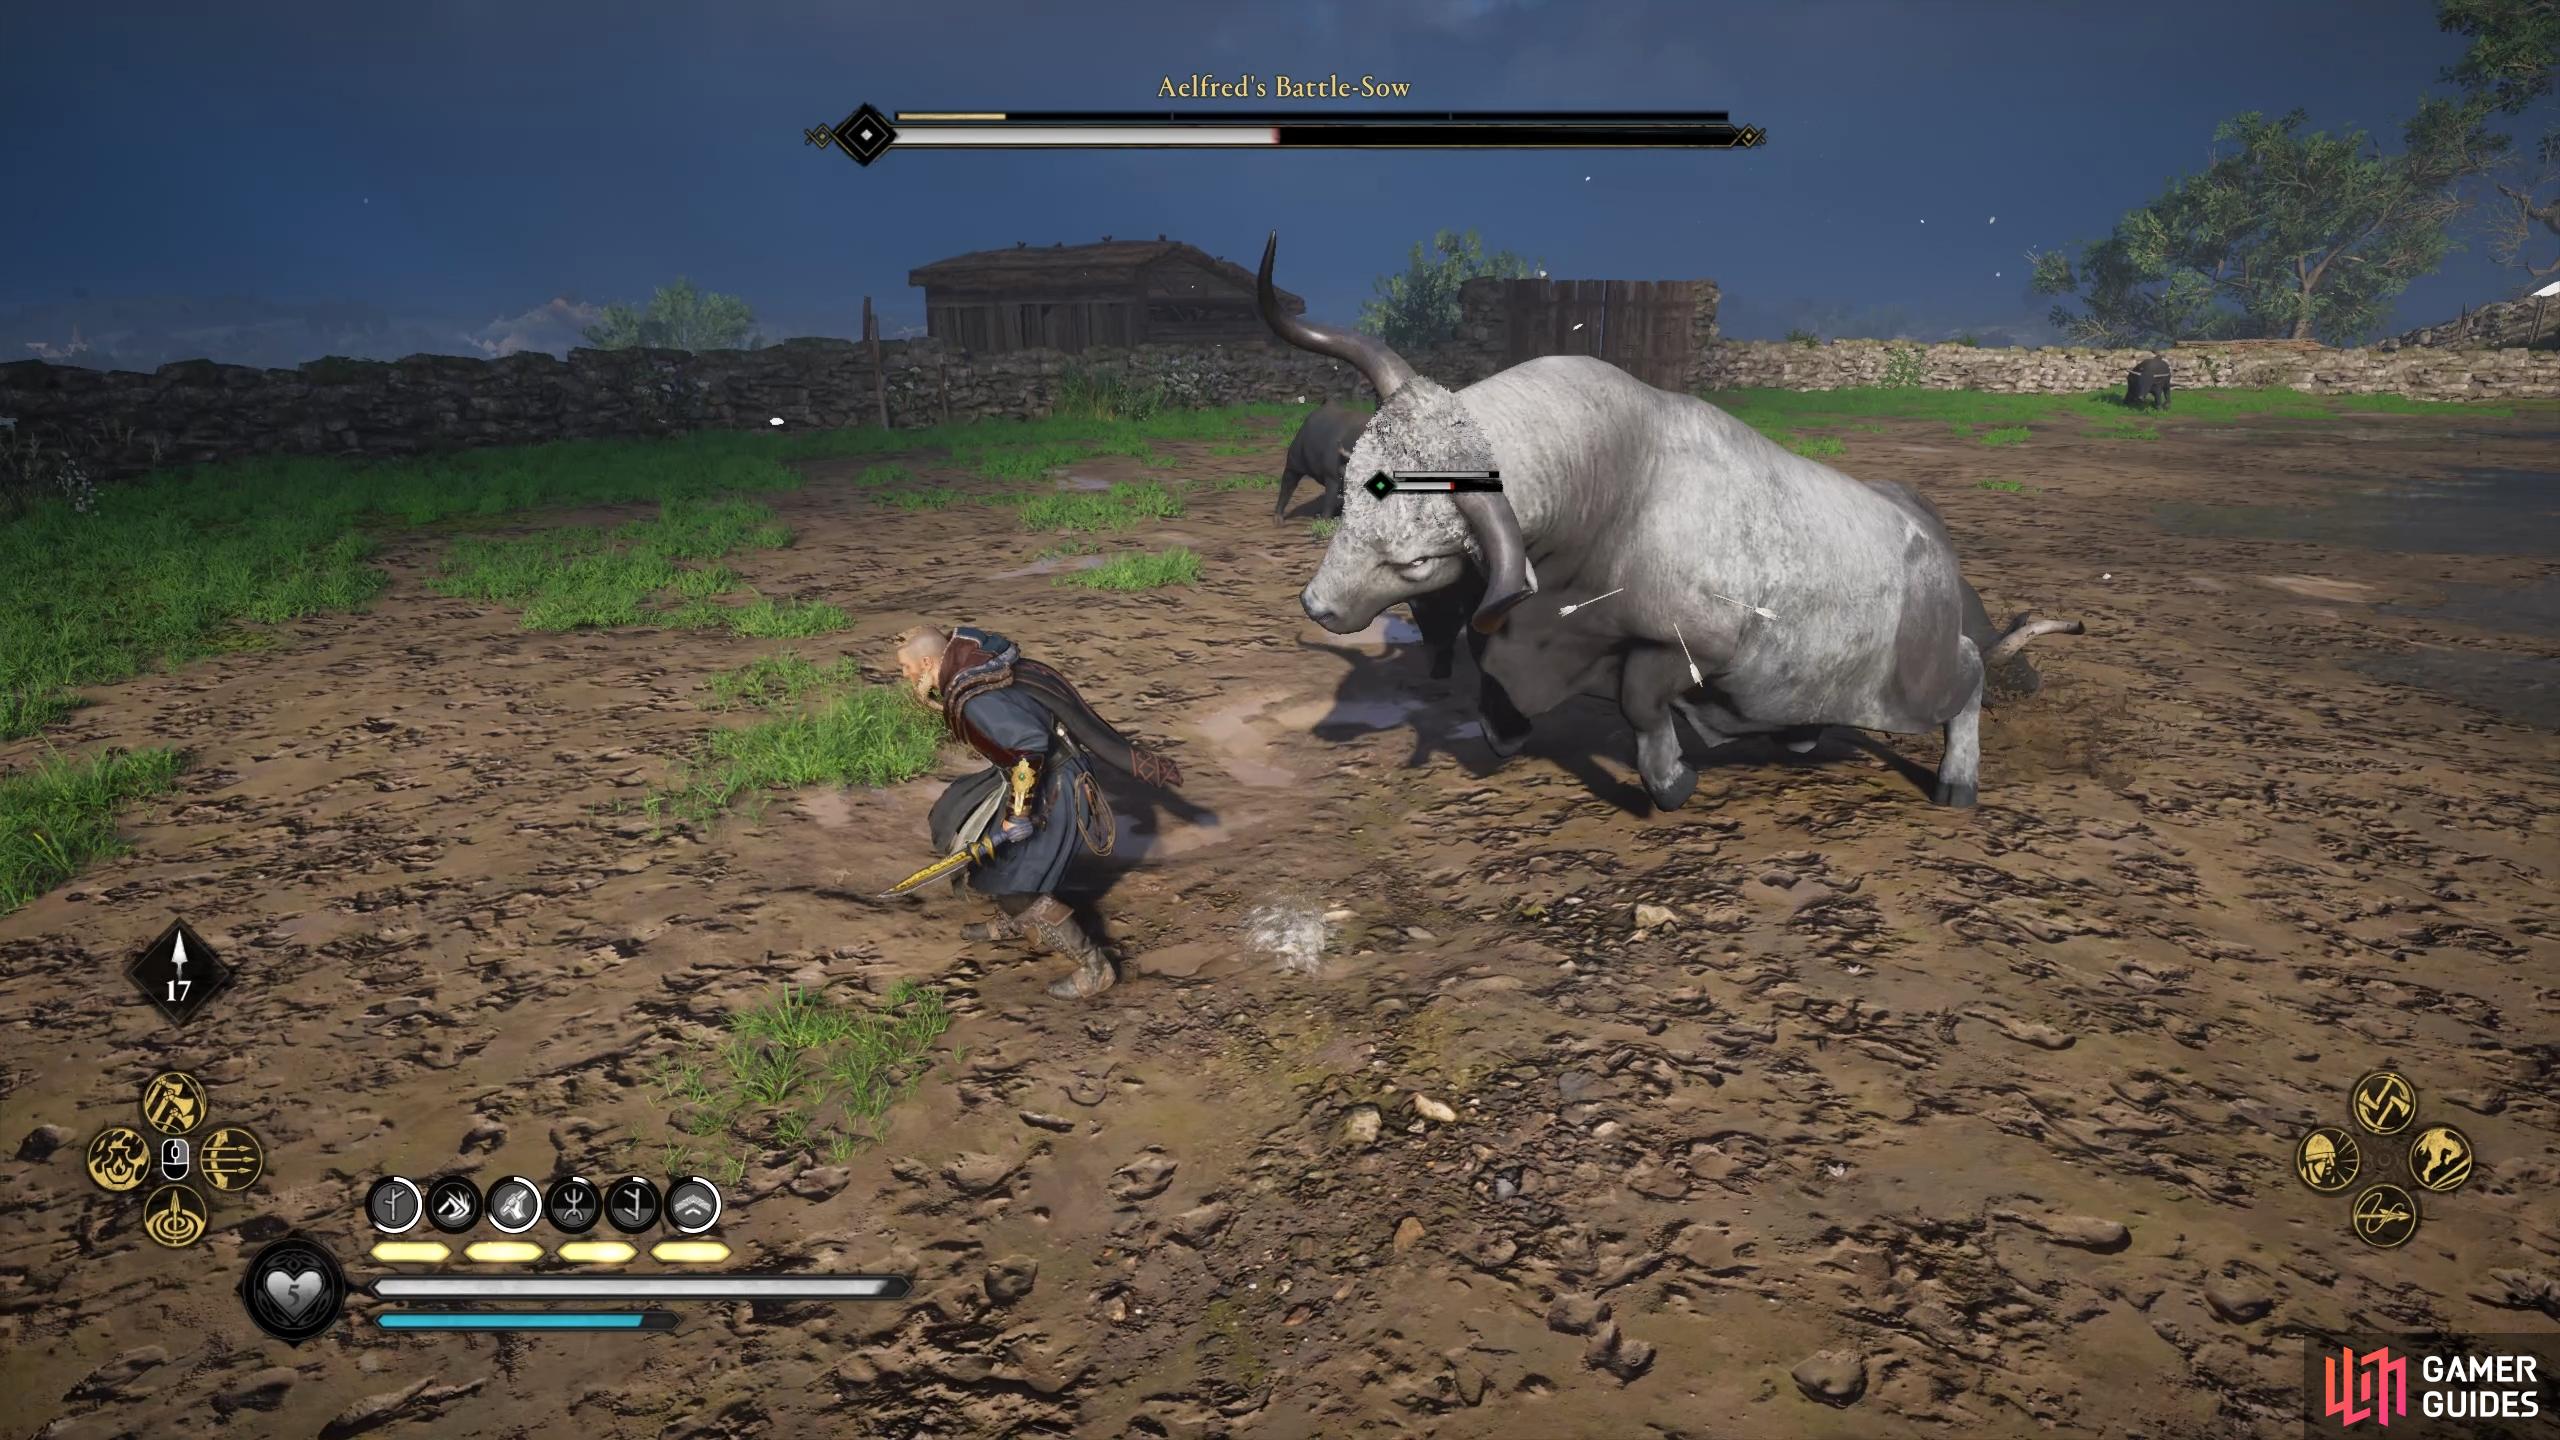 When the Battle-Sow initiates its chain headbutt attack, youre better off running than dodging.